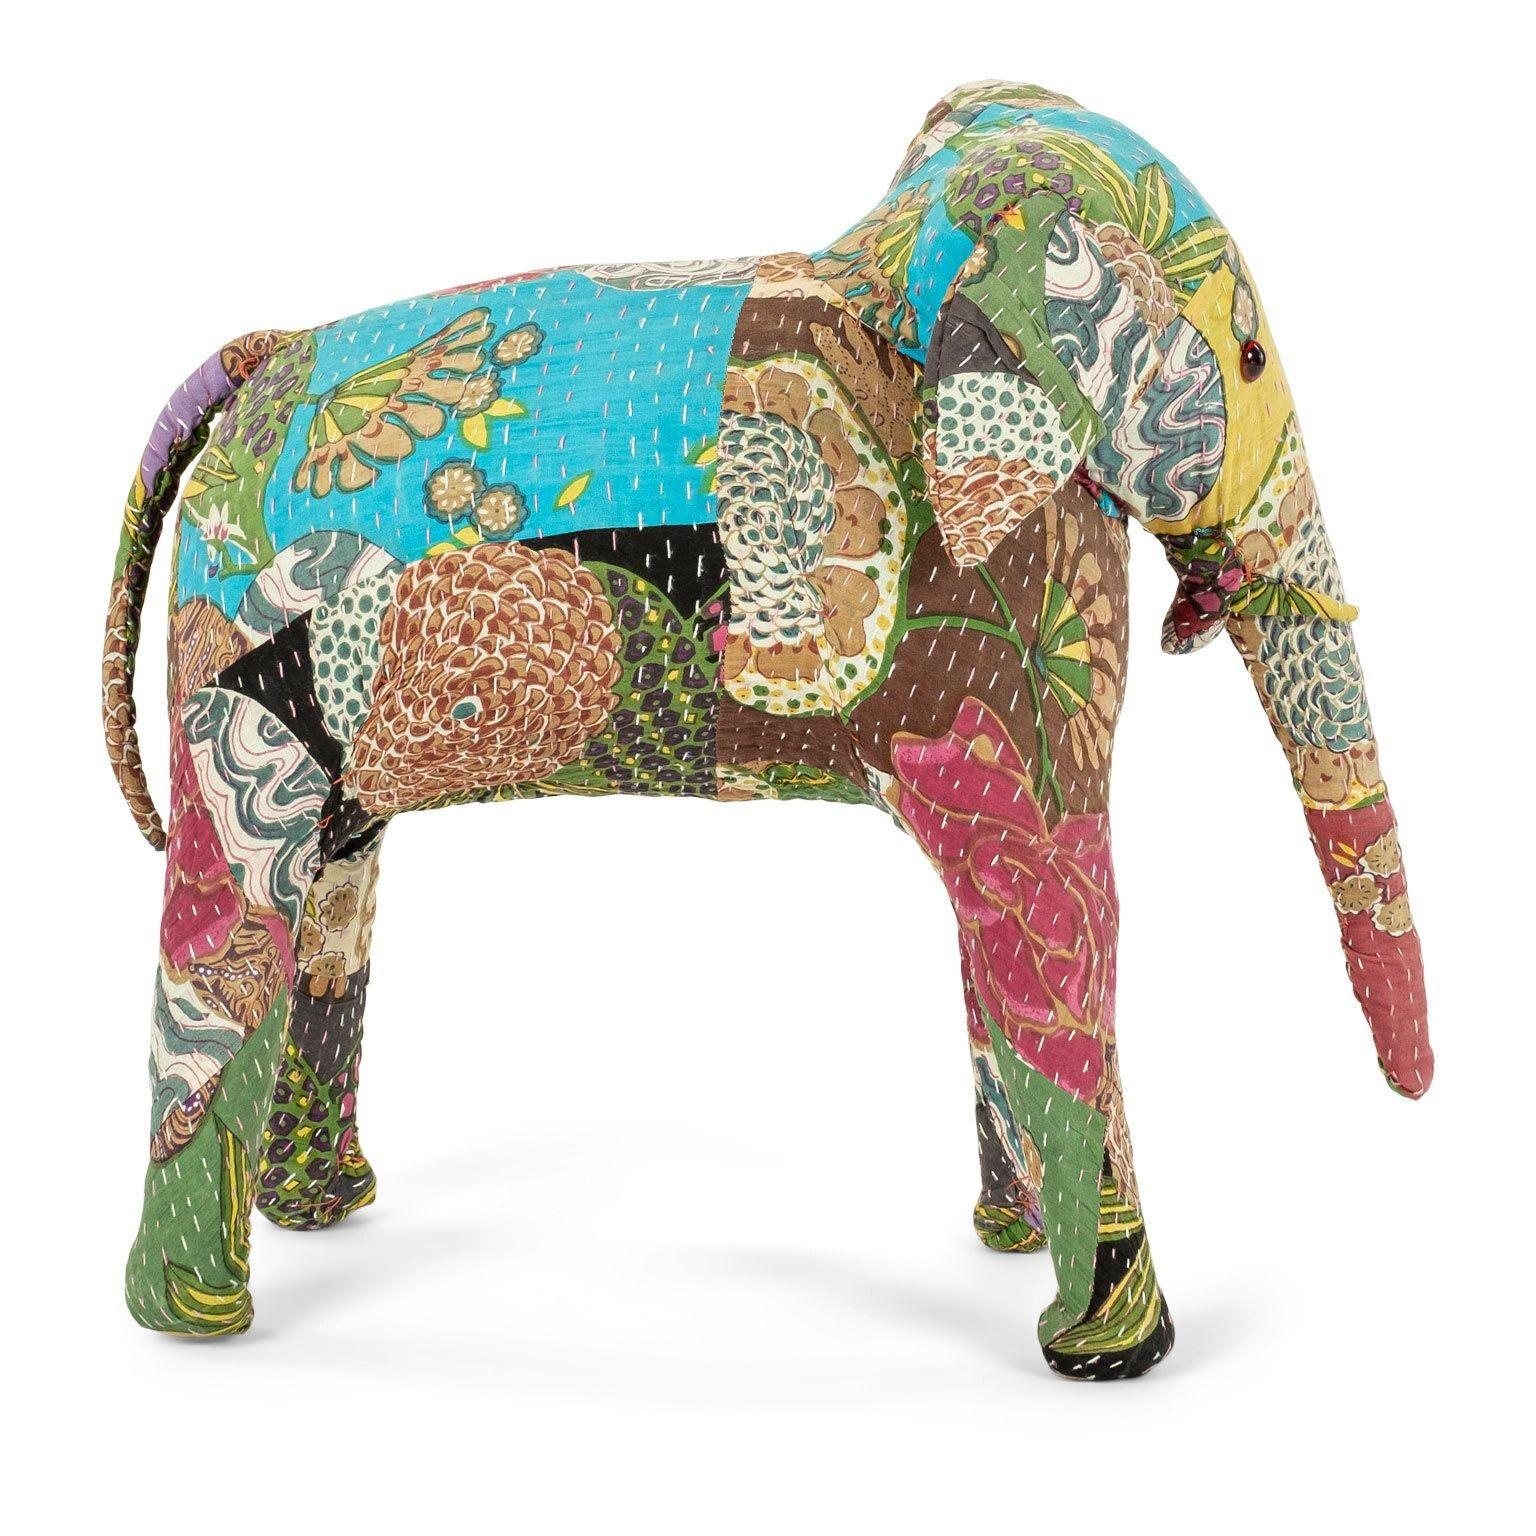 Woven Vintage Cotton Elephant Covered in Indian Textiles For Sale